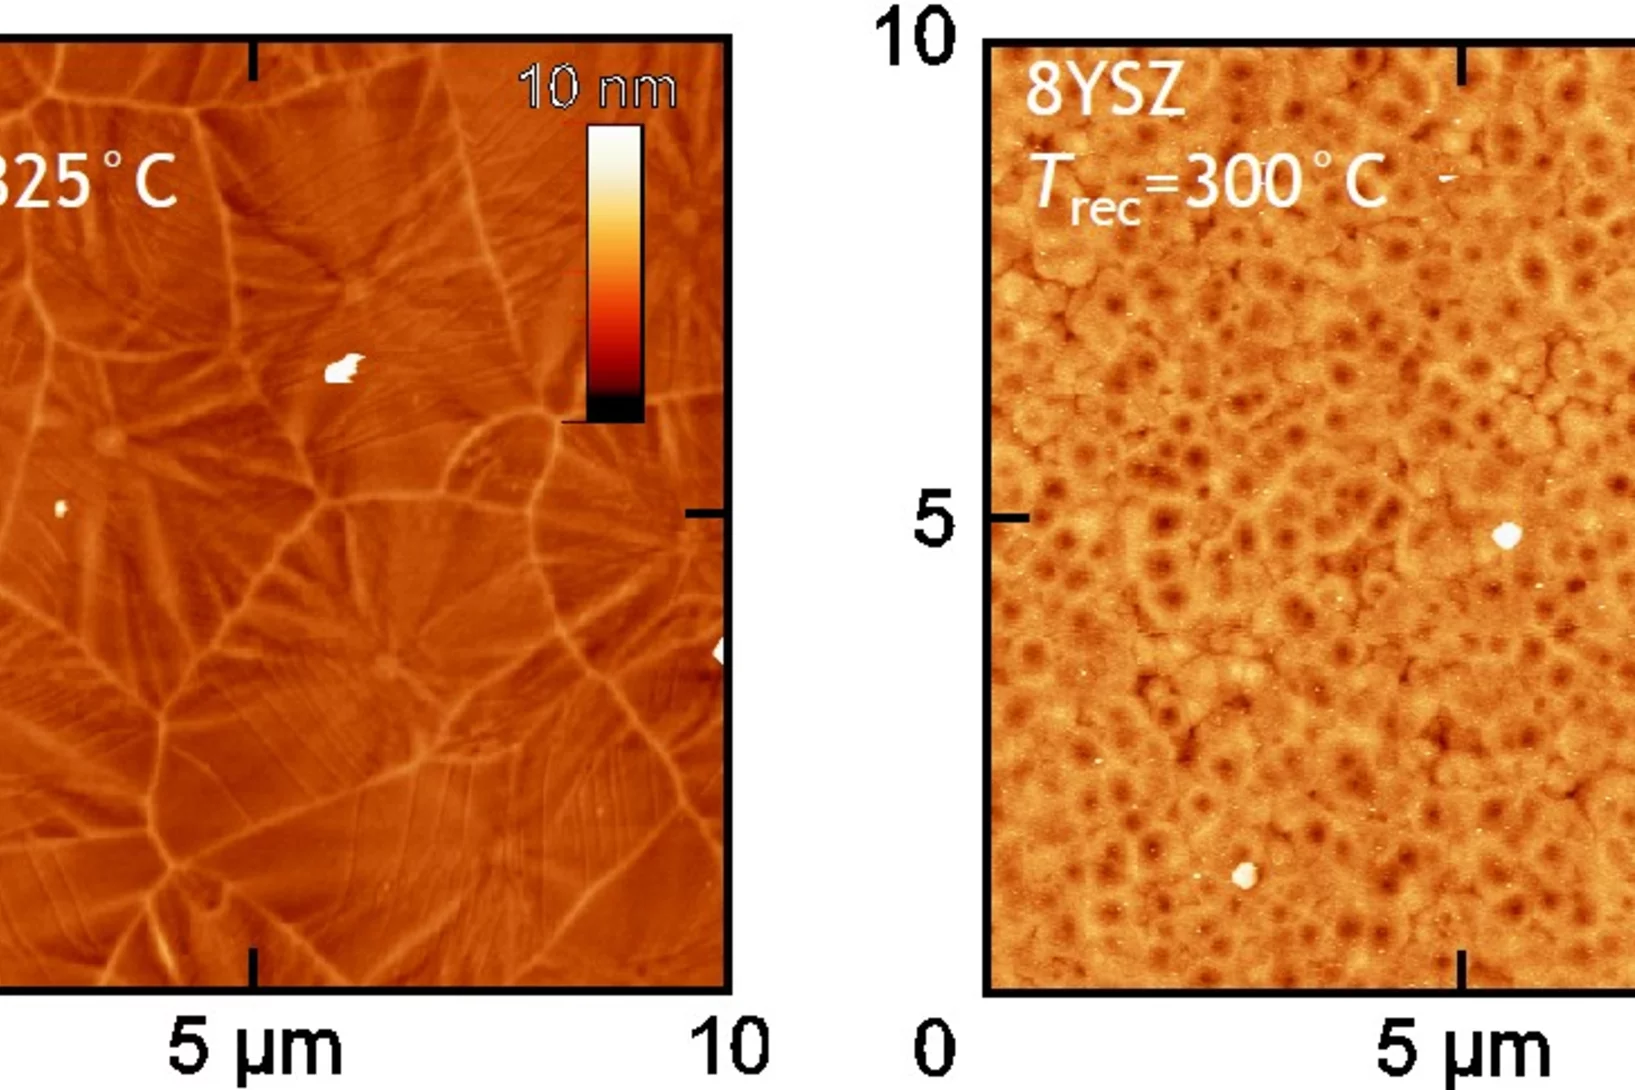 Enhanced recrystallization kinetics of pulsed laser deposited amorphous 3YSZ and 8YSZ thin films leading to abnormal grain growth for 3YSZ.